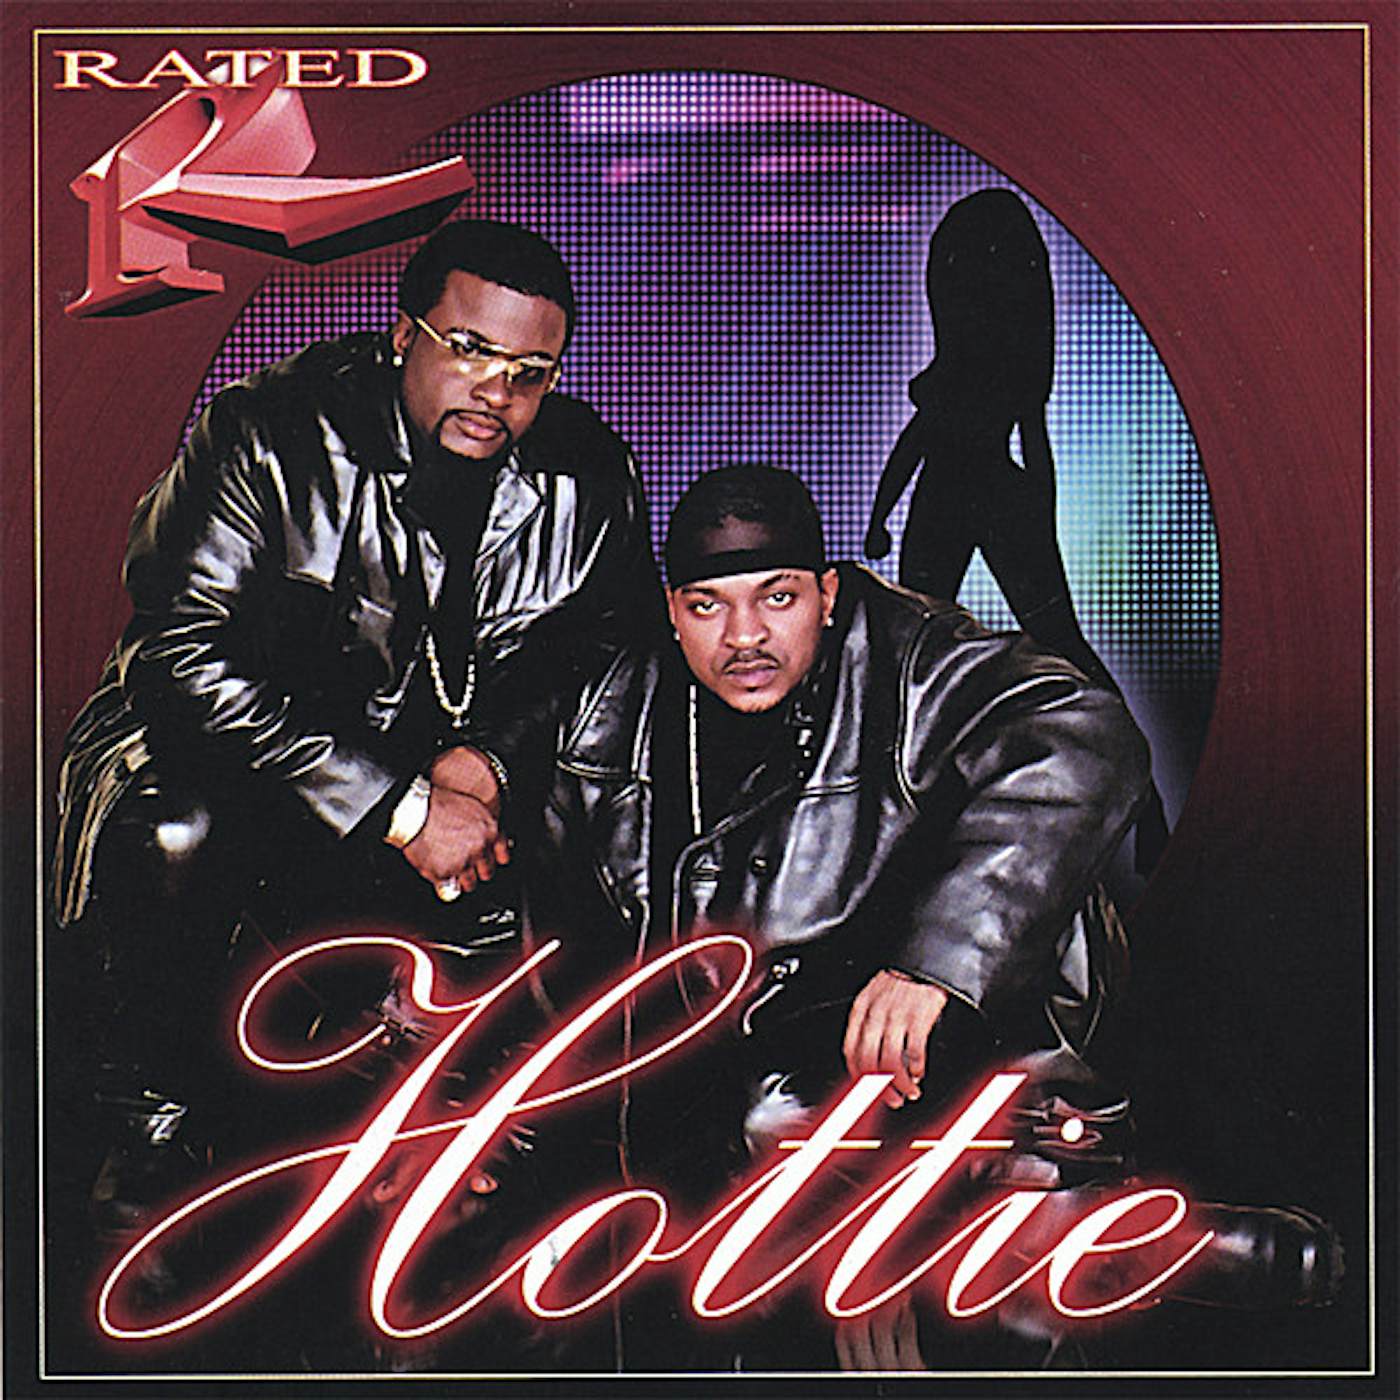 Rated R HOTTIE CD